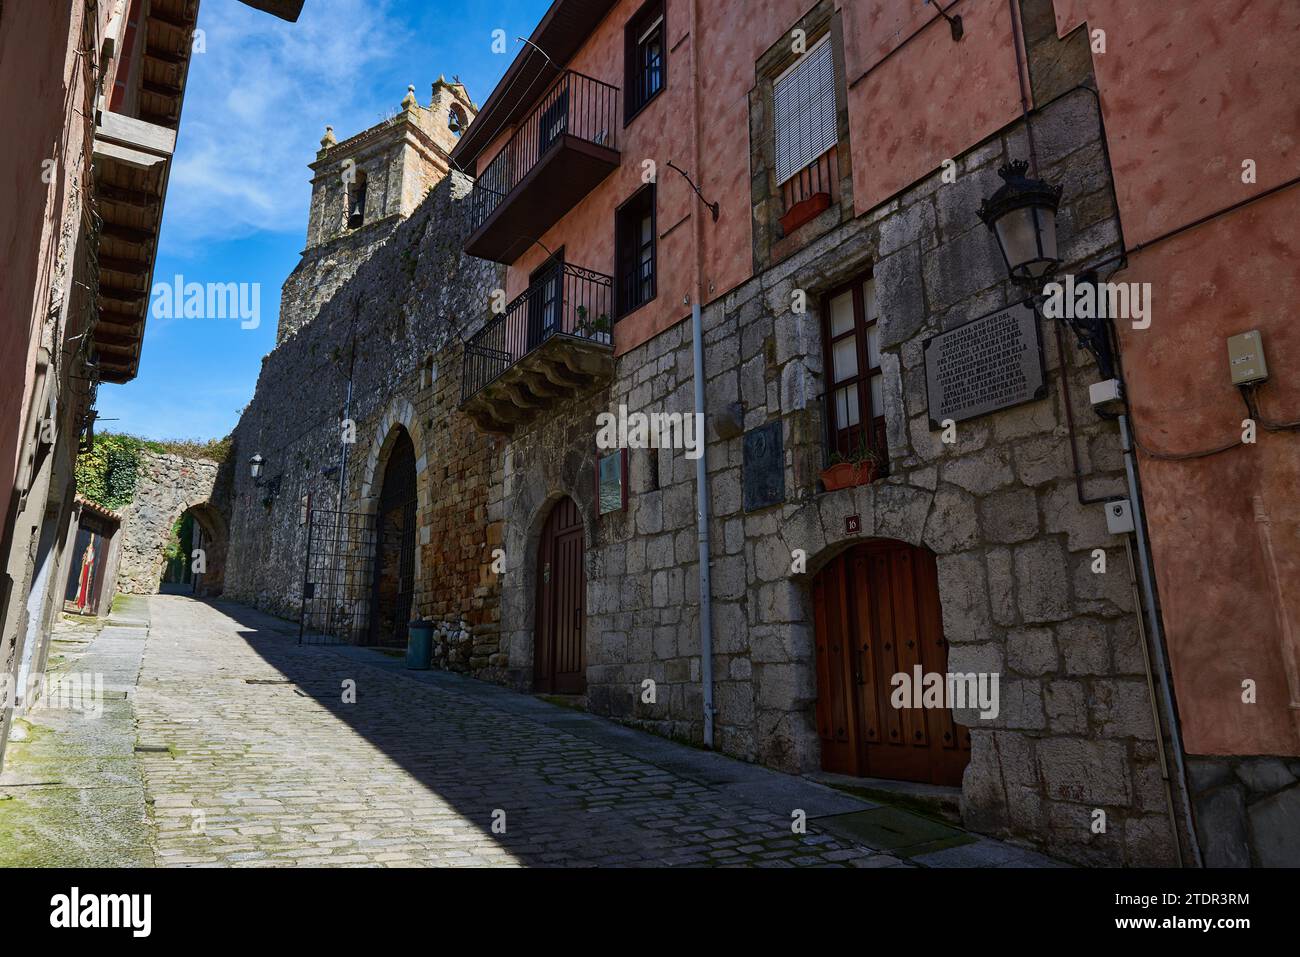 View of the San Marcial street, Laredo, Cantabria, Spain, Europe. Stock Photo